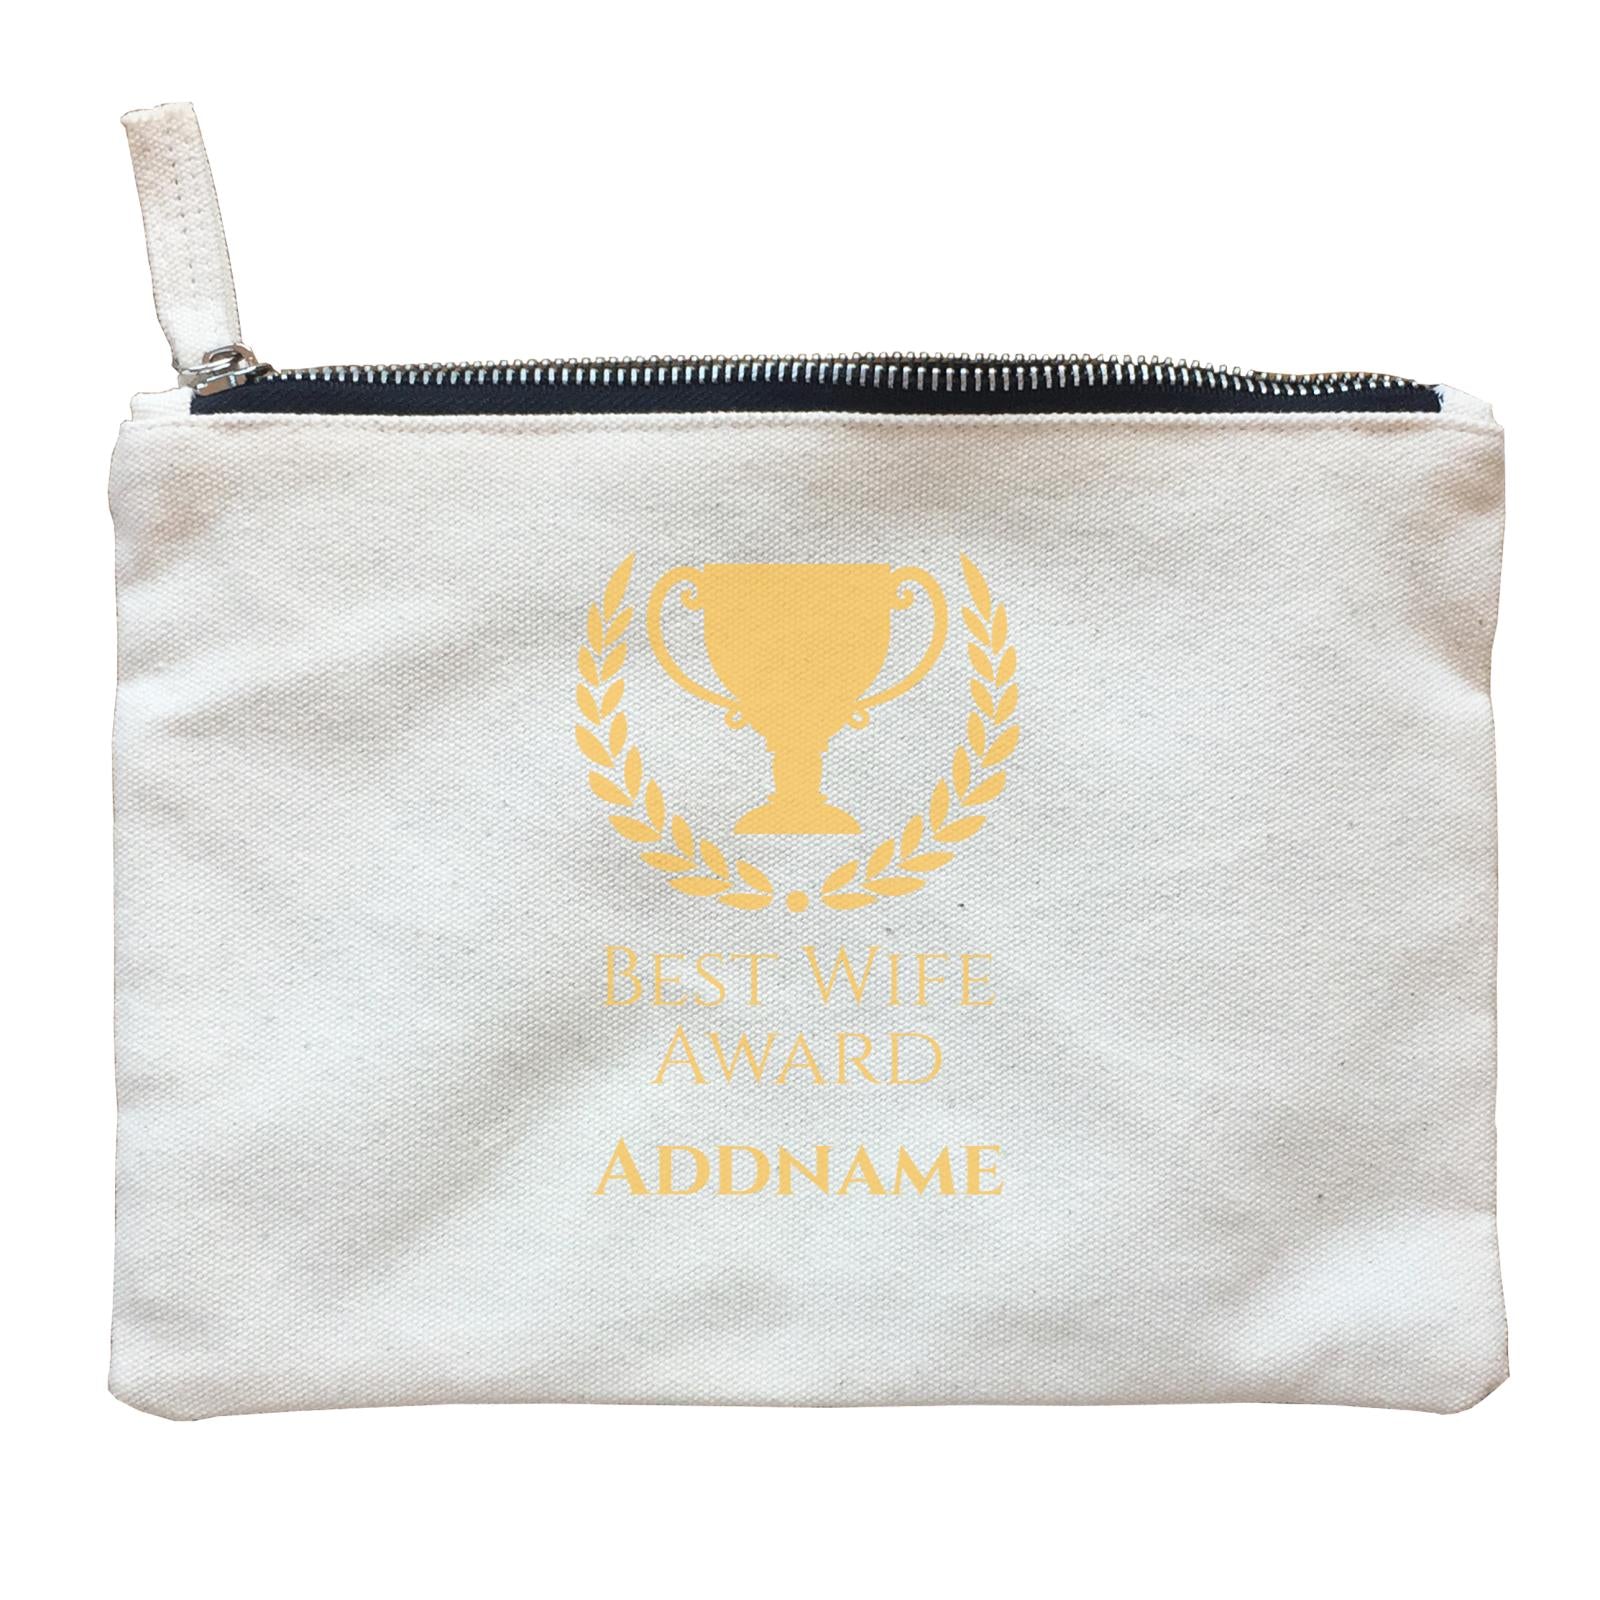 Husband and Wife Trophy Best Wife Award Addname Zipper Pouch